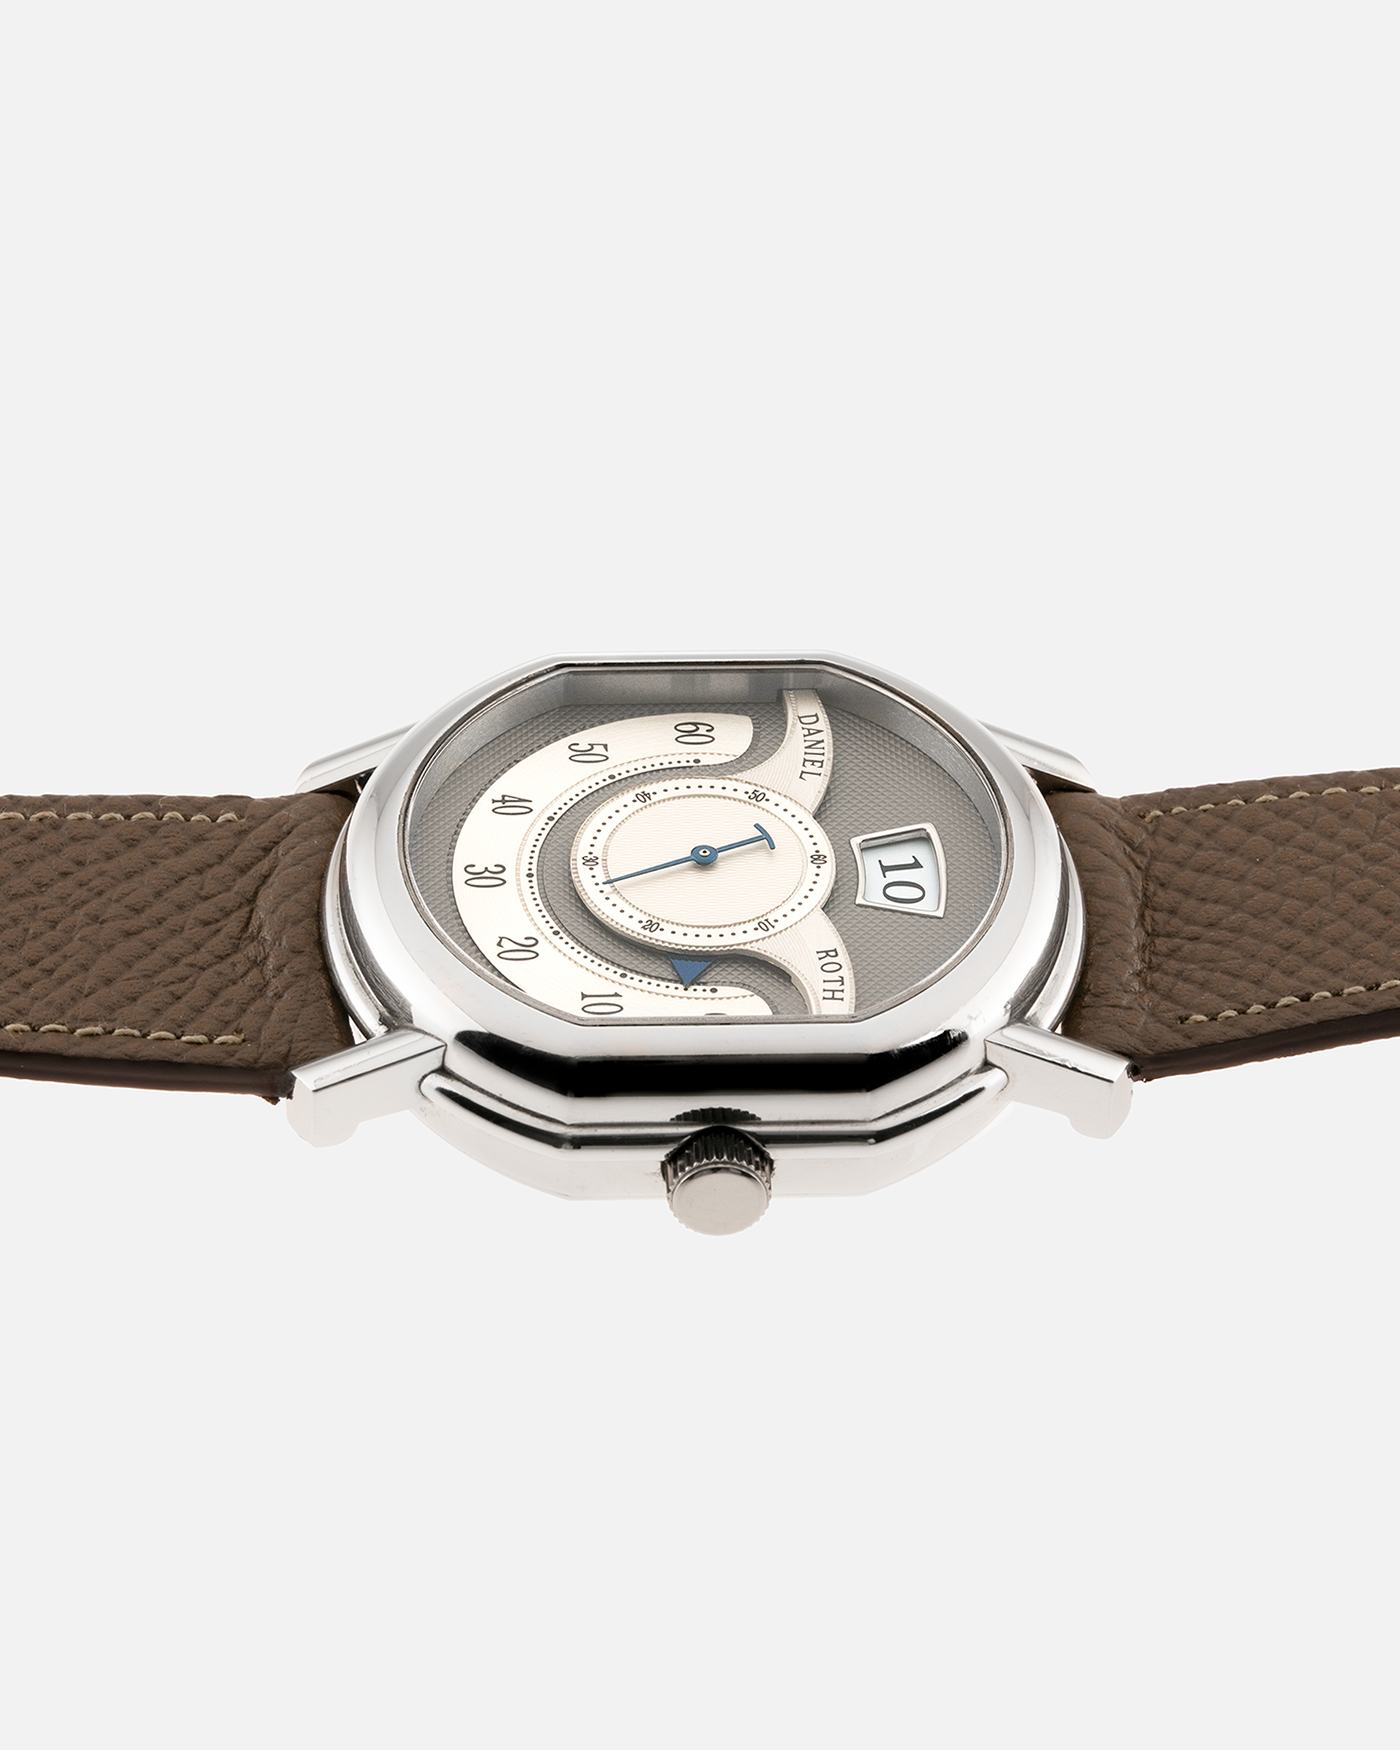 Brand: Daniel Roth Year: 1999 Model: 10th Anniversary Papillon Material: Platinum Movement: Daniel Roth Calibre DR113 Case Diameter: 35mm X 41mm X 11mm Strap: Nostime Taupe Textured Calf Strap with Platinum Tang Buckle